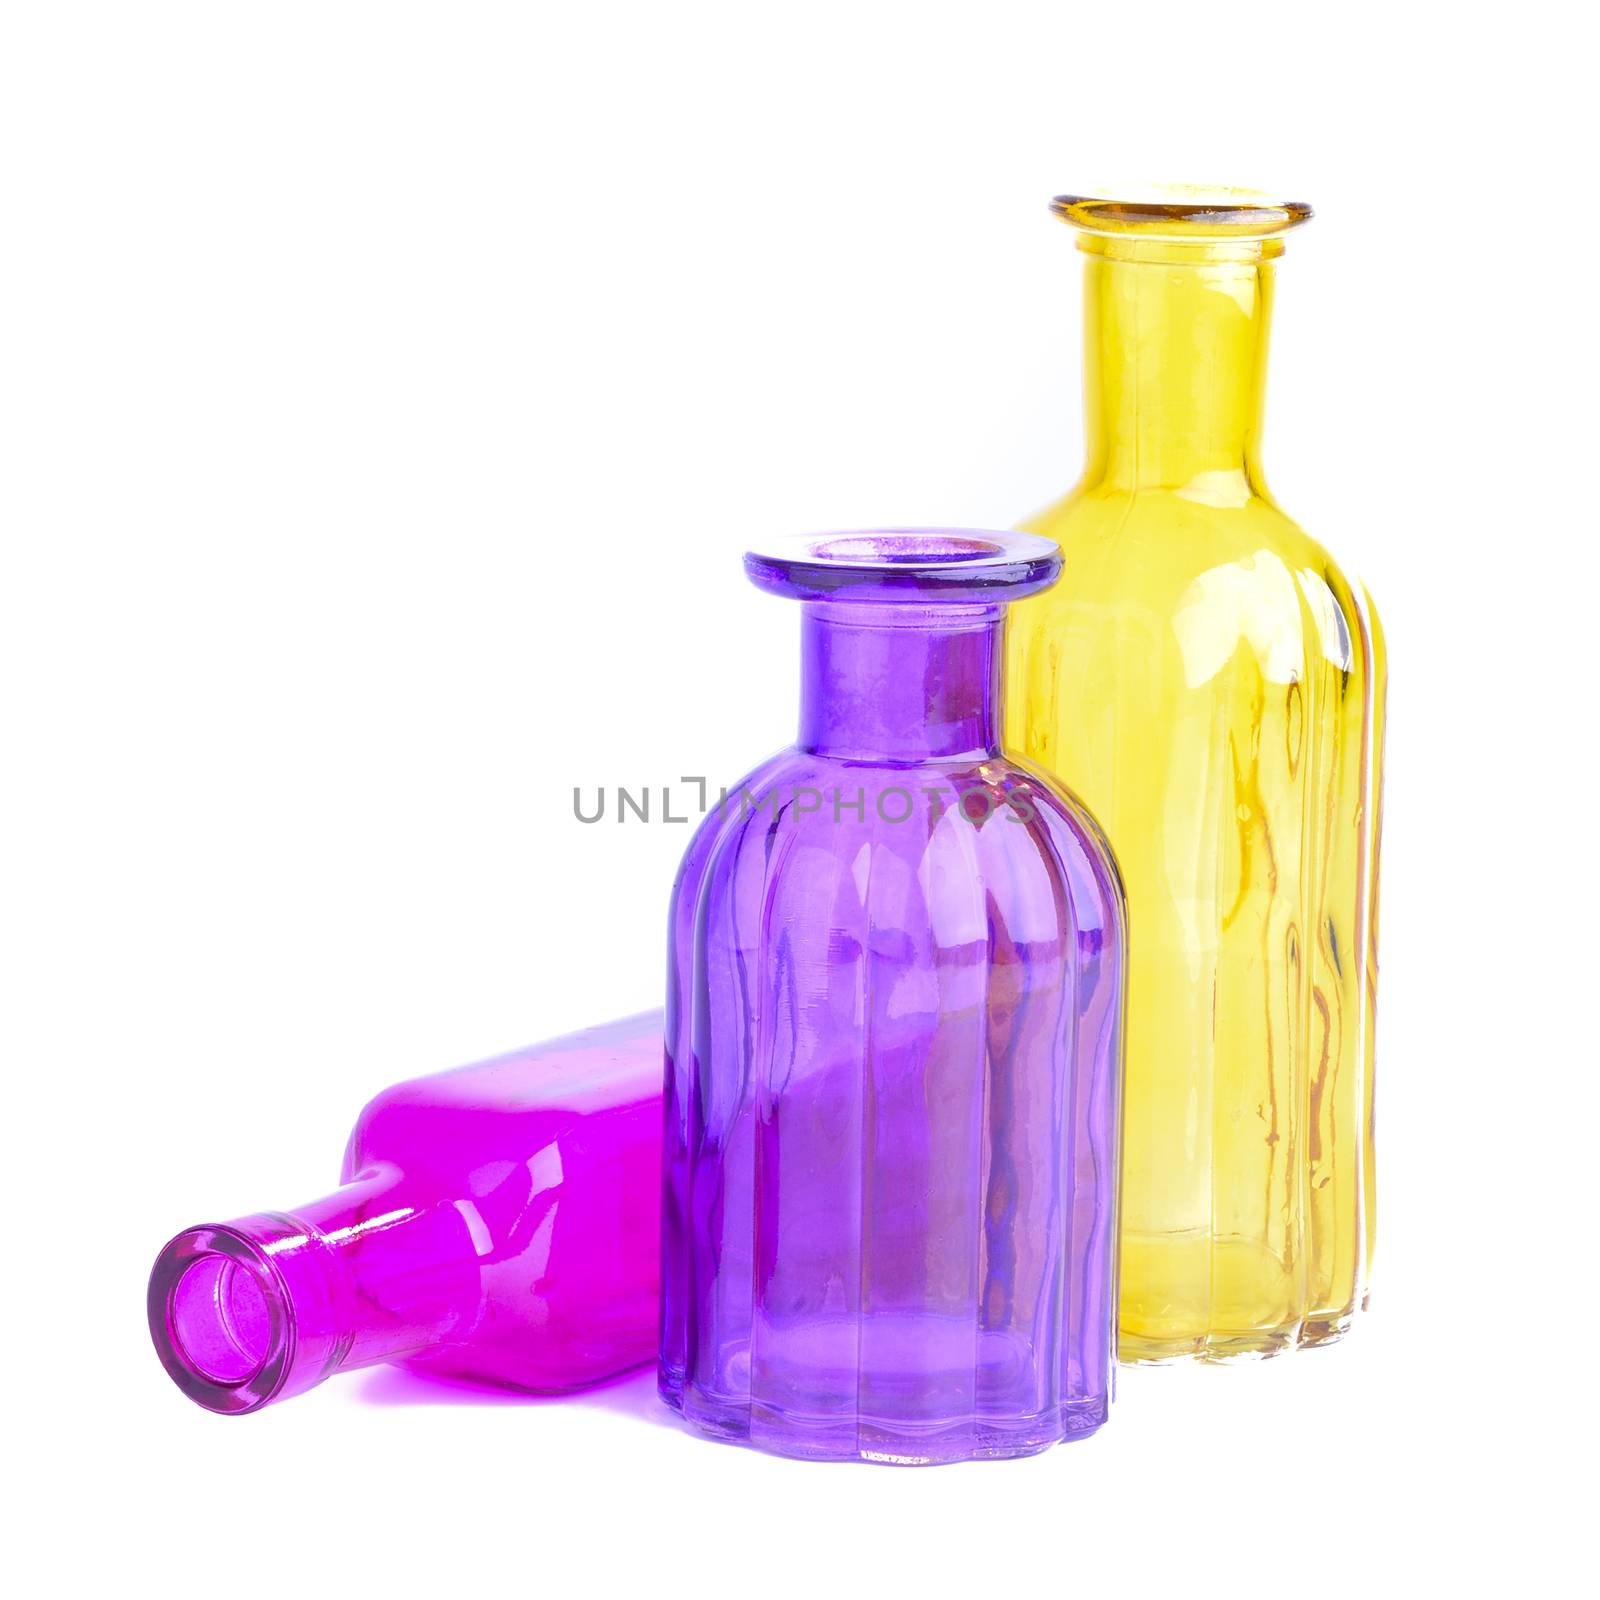 Three colorful bottles, isolated on white background